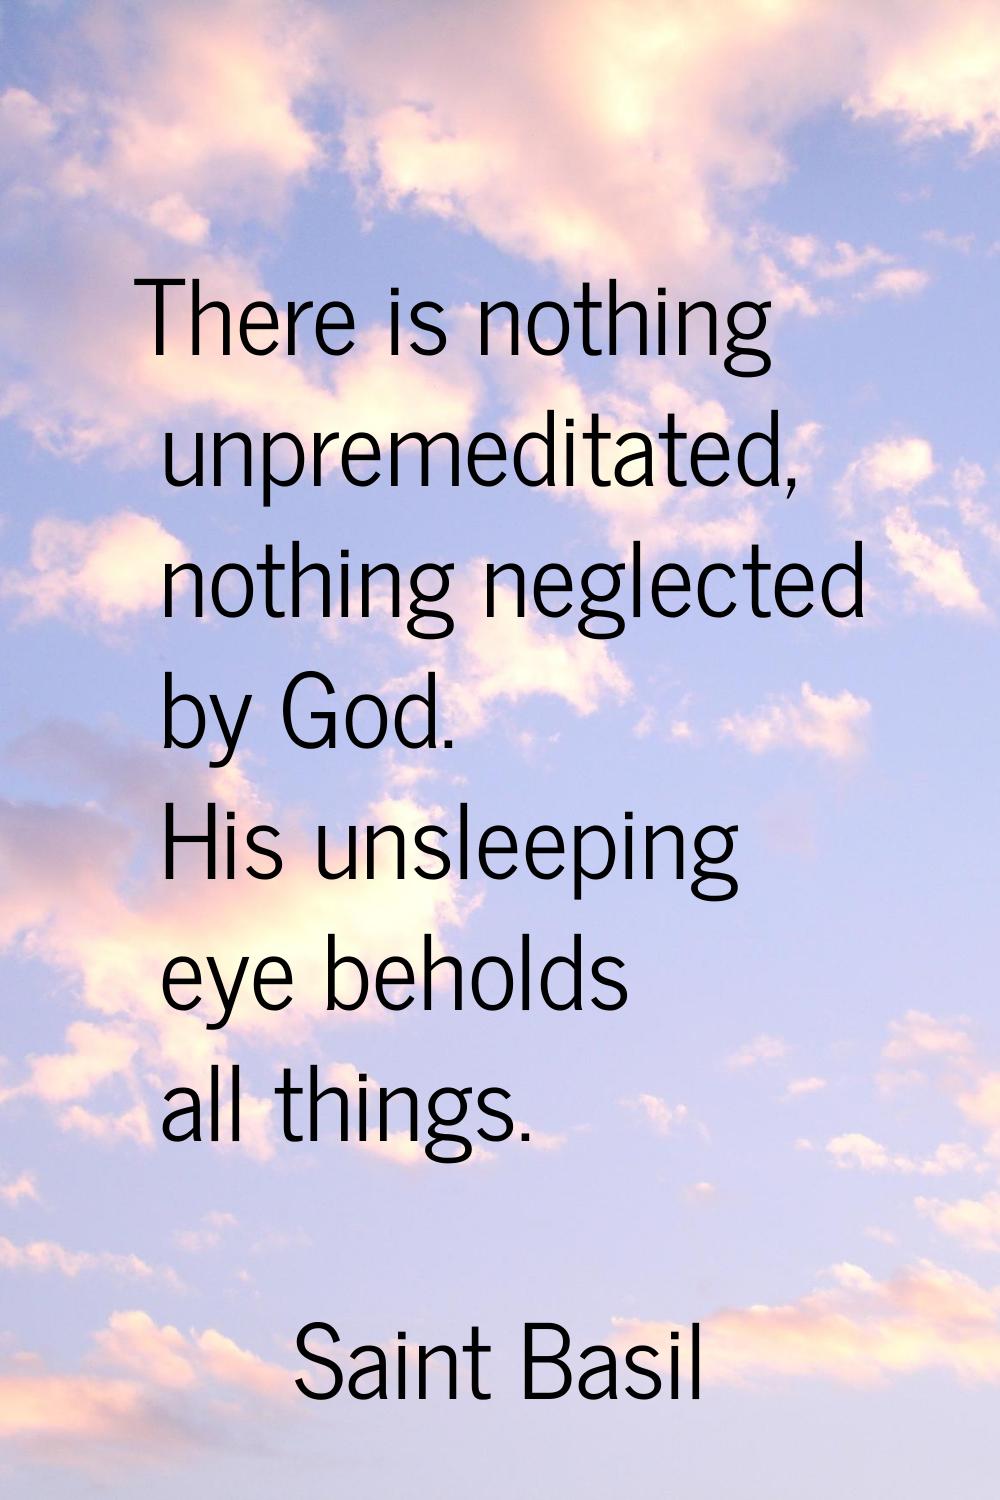 There is nothing unpremeditated, nothing neglected by God. His unsleeping eye beholds all things.